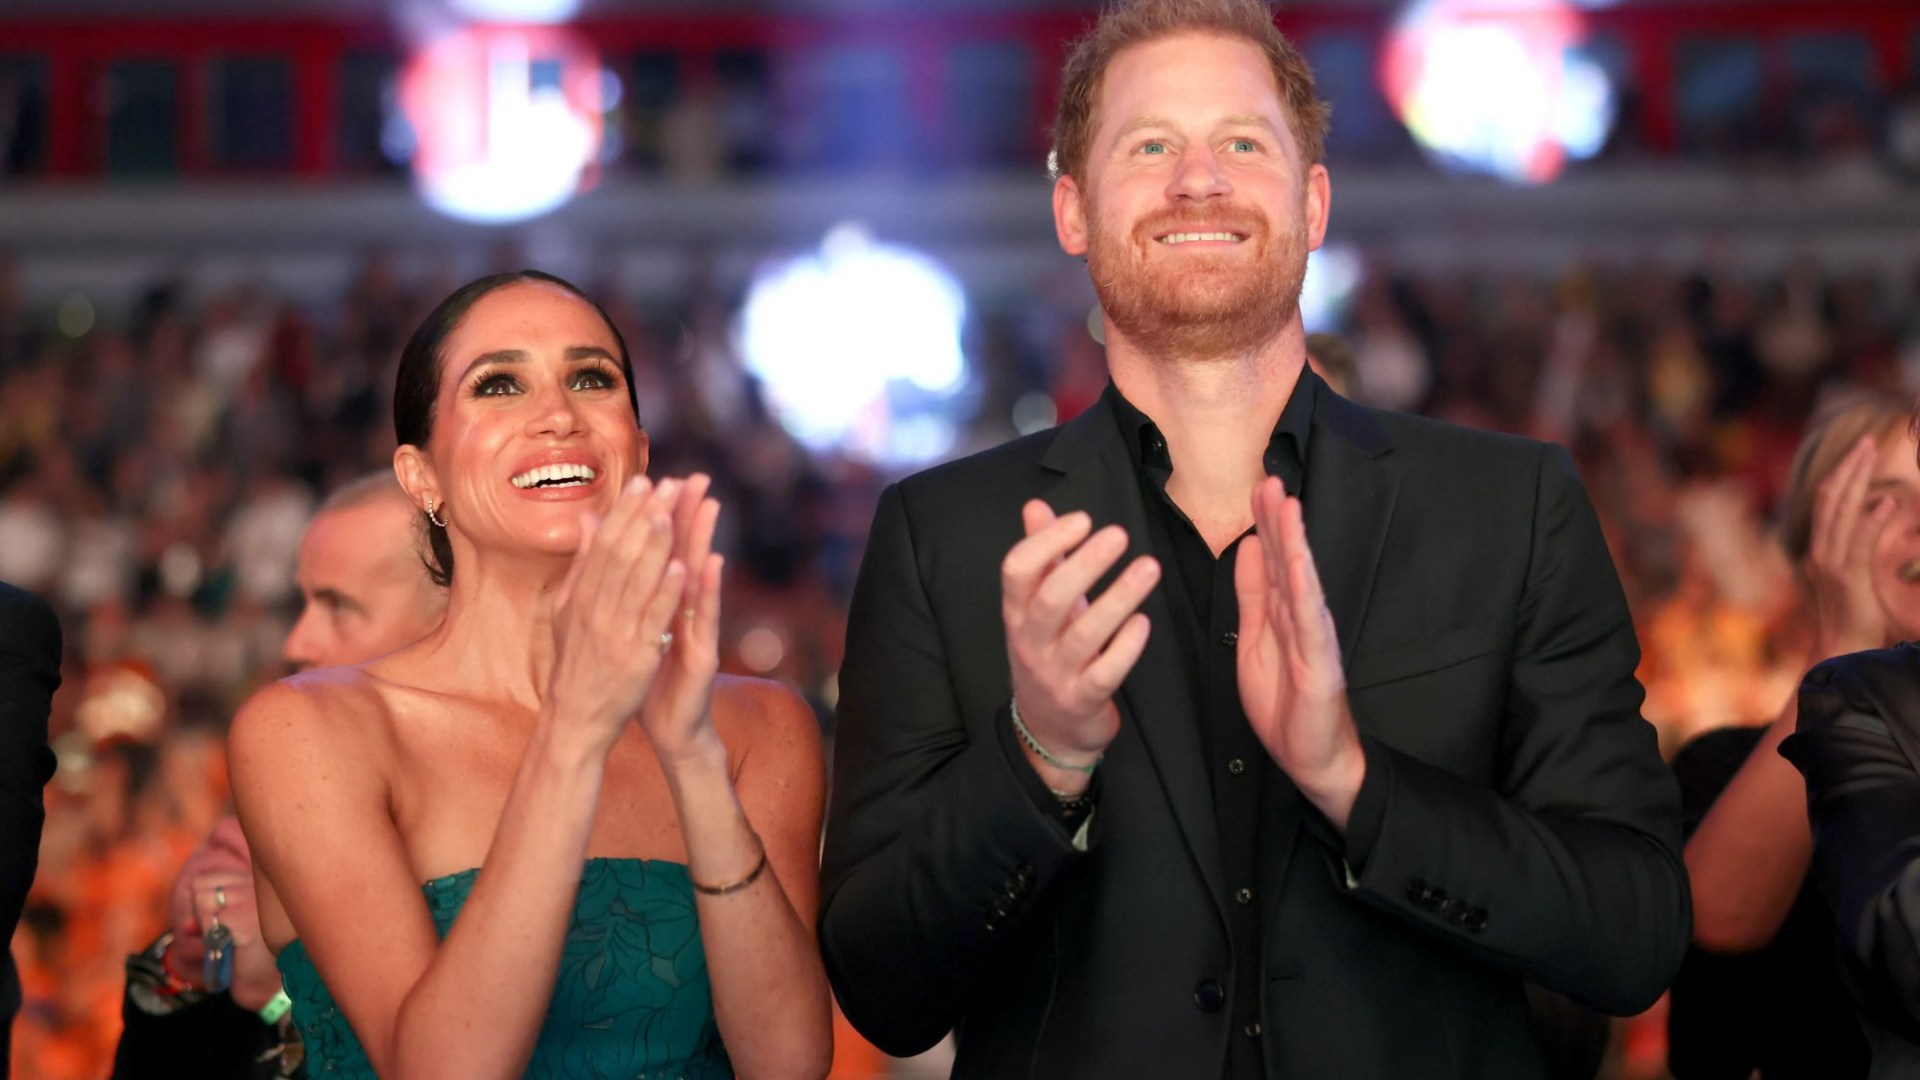 Meghan has ‘failed to find CEO’ for lifestyle brand despite weeks of searching… as filming begins for new Netflix show